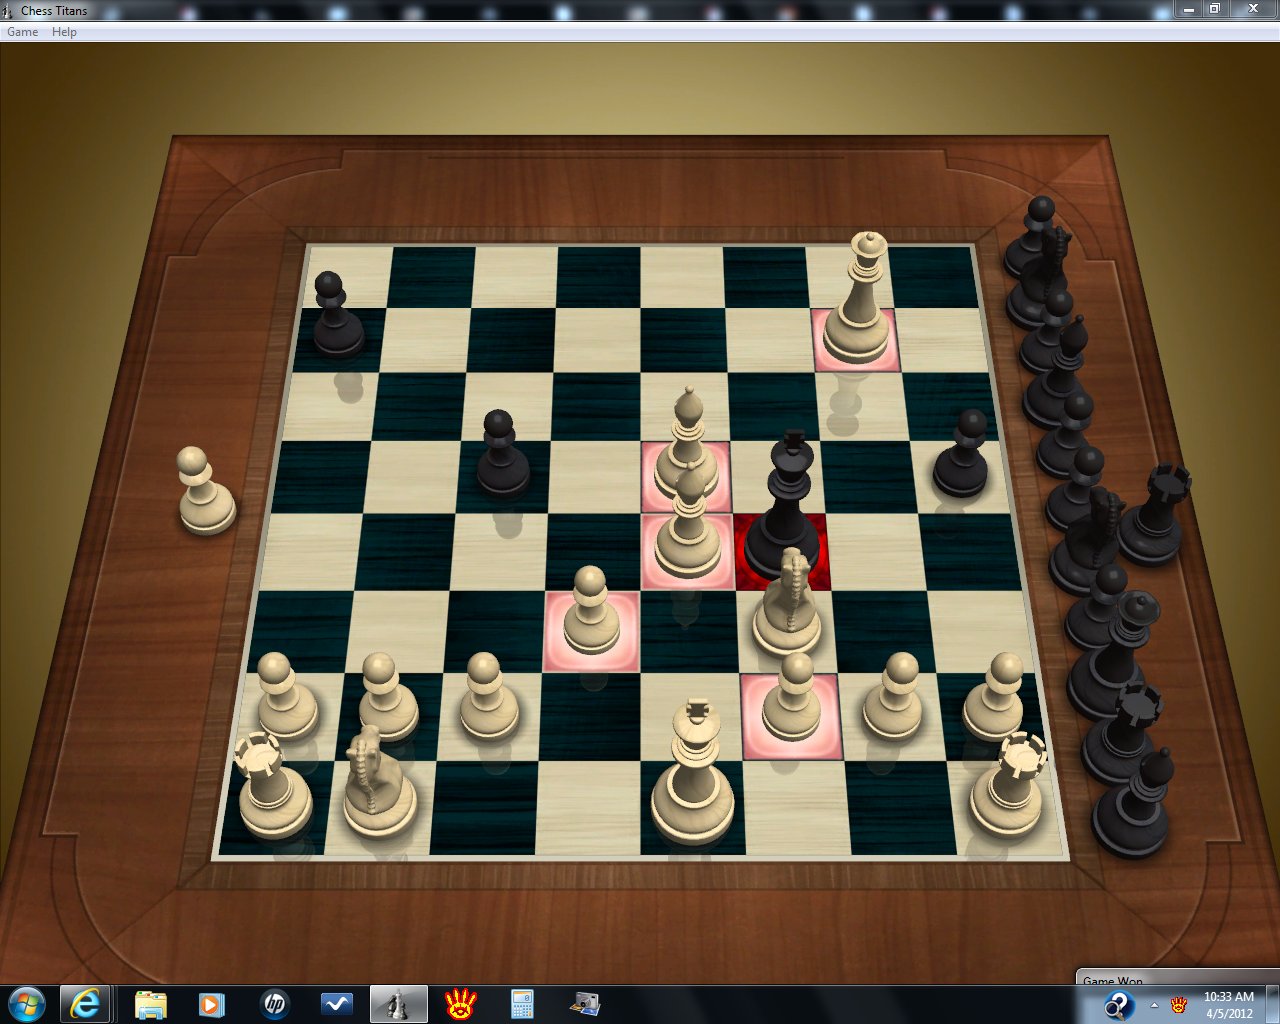 chess game download for pc windows 10 free cnet